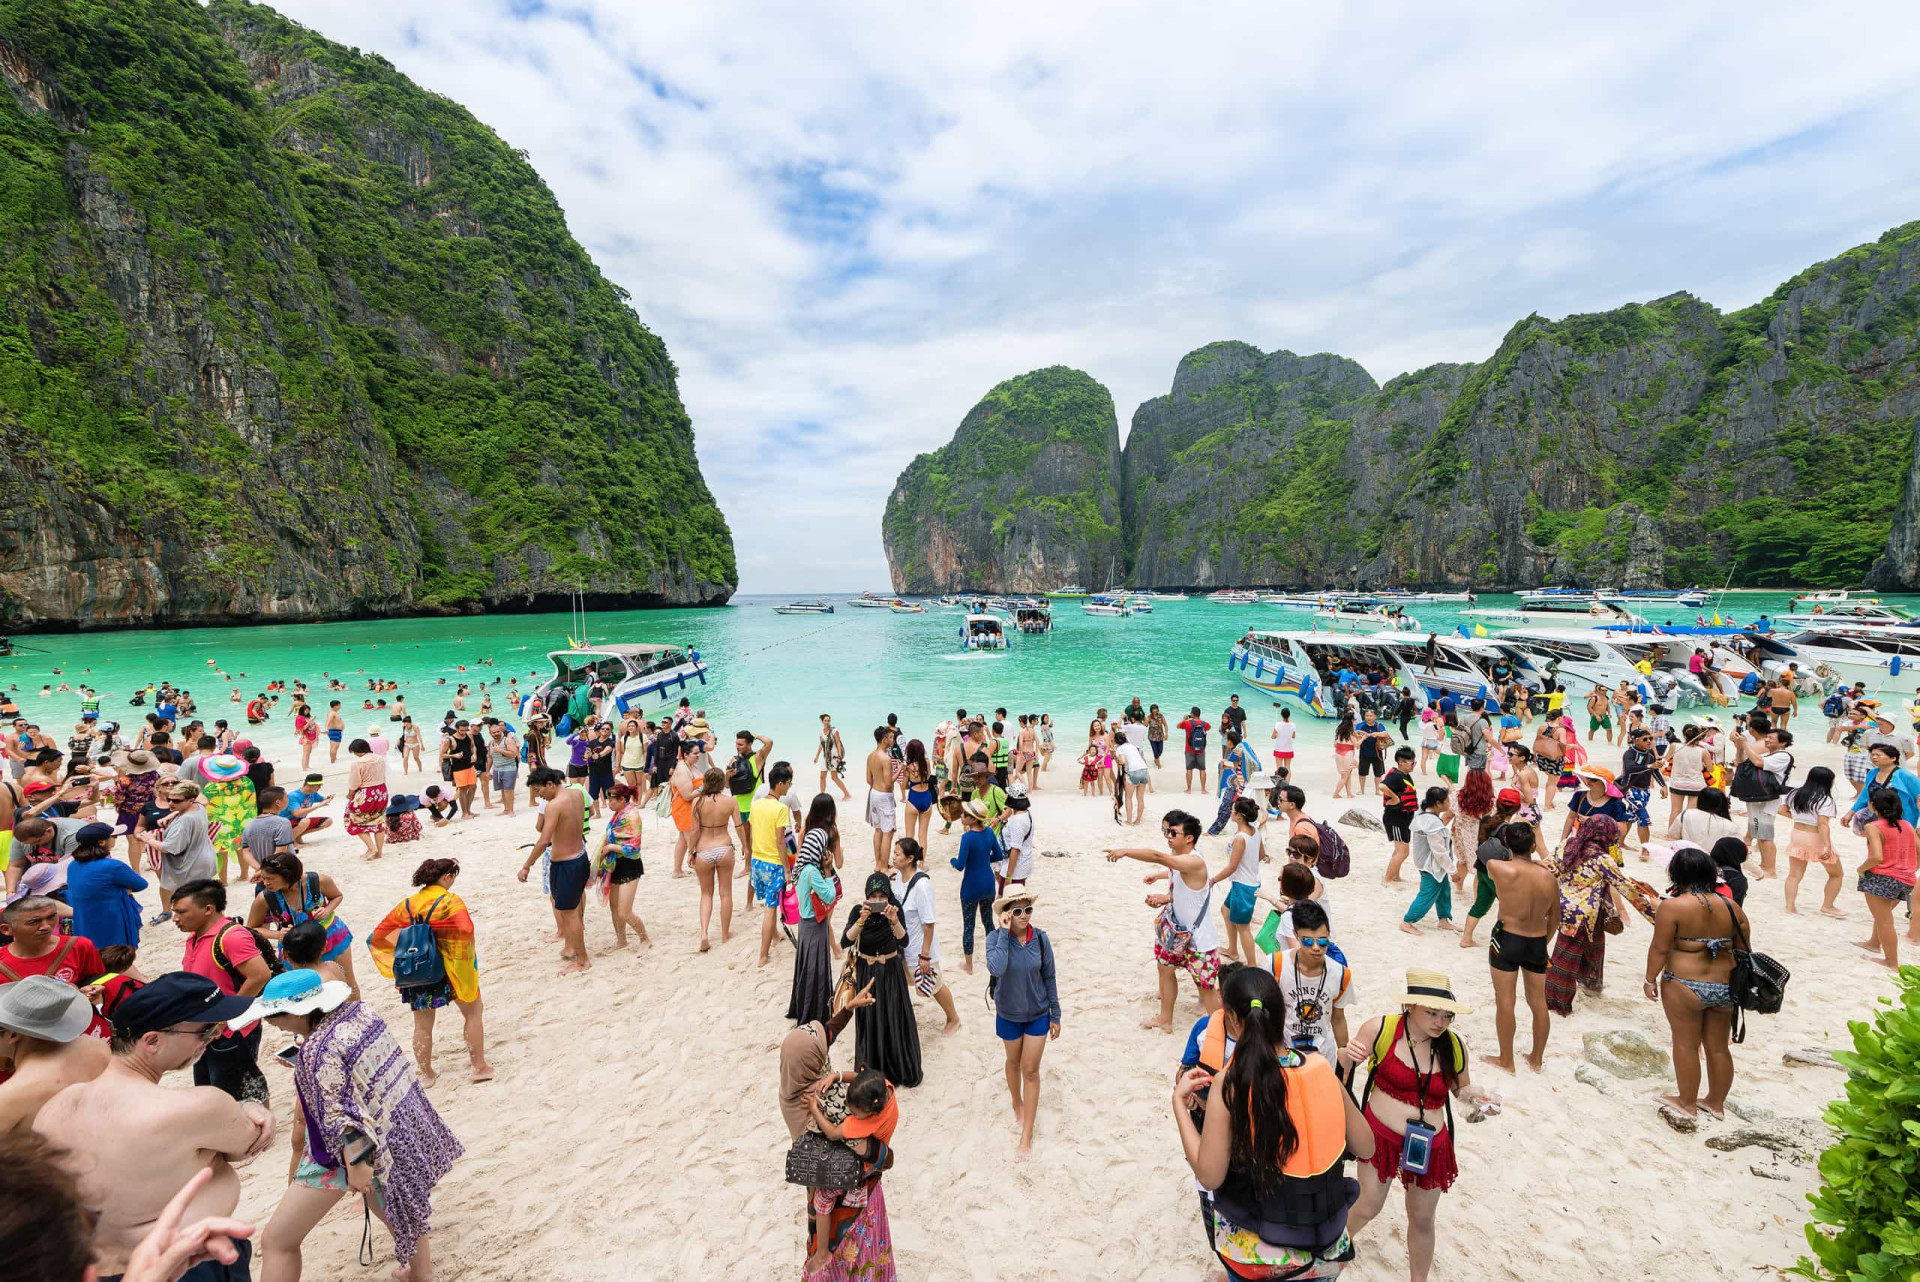 <p>Maya Bay was so overrun by tourists after the Leonardo DiCaprio film 'The Beach' (2000) that Thai authorities banned visitors, citing damage to the bay's fragile ecosystem.</p><p><a href="https://www.msn.com/en-my/community/channel/vid-7xx8mnucu55yw63we9va2gwr7uihbxwc68fxqp25x6tg4ftibpra?cvid=94631541bc0f4f89bfd59158d696ad7e">Follow us and access great exclusive content every day</a></p>